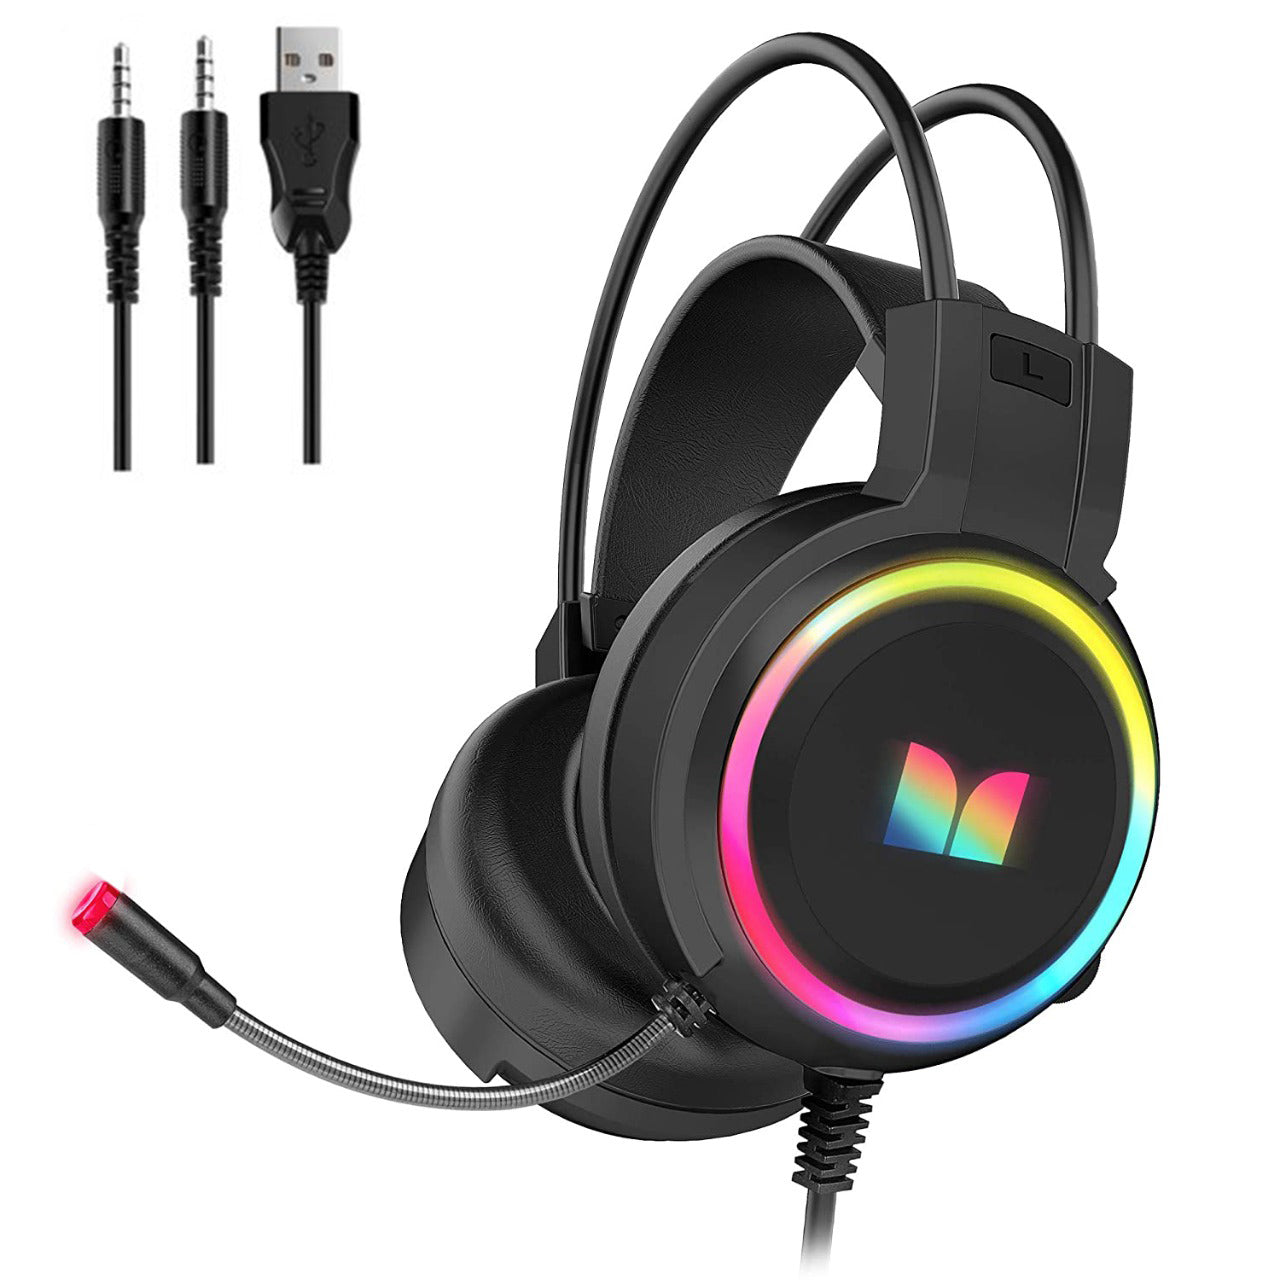 MONSTER RGB GAMING HEADPHONE 2 PIN AND USB FOR LIGHT - Headphone - Wired Headphone - Gaming Headphone - Wired Gaming Headphone